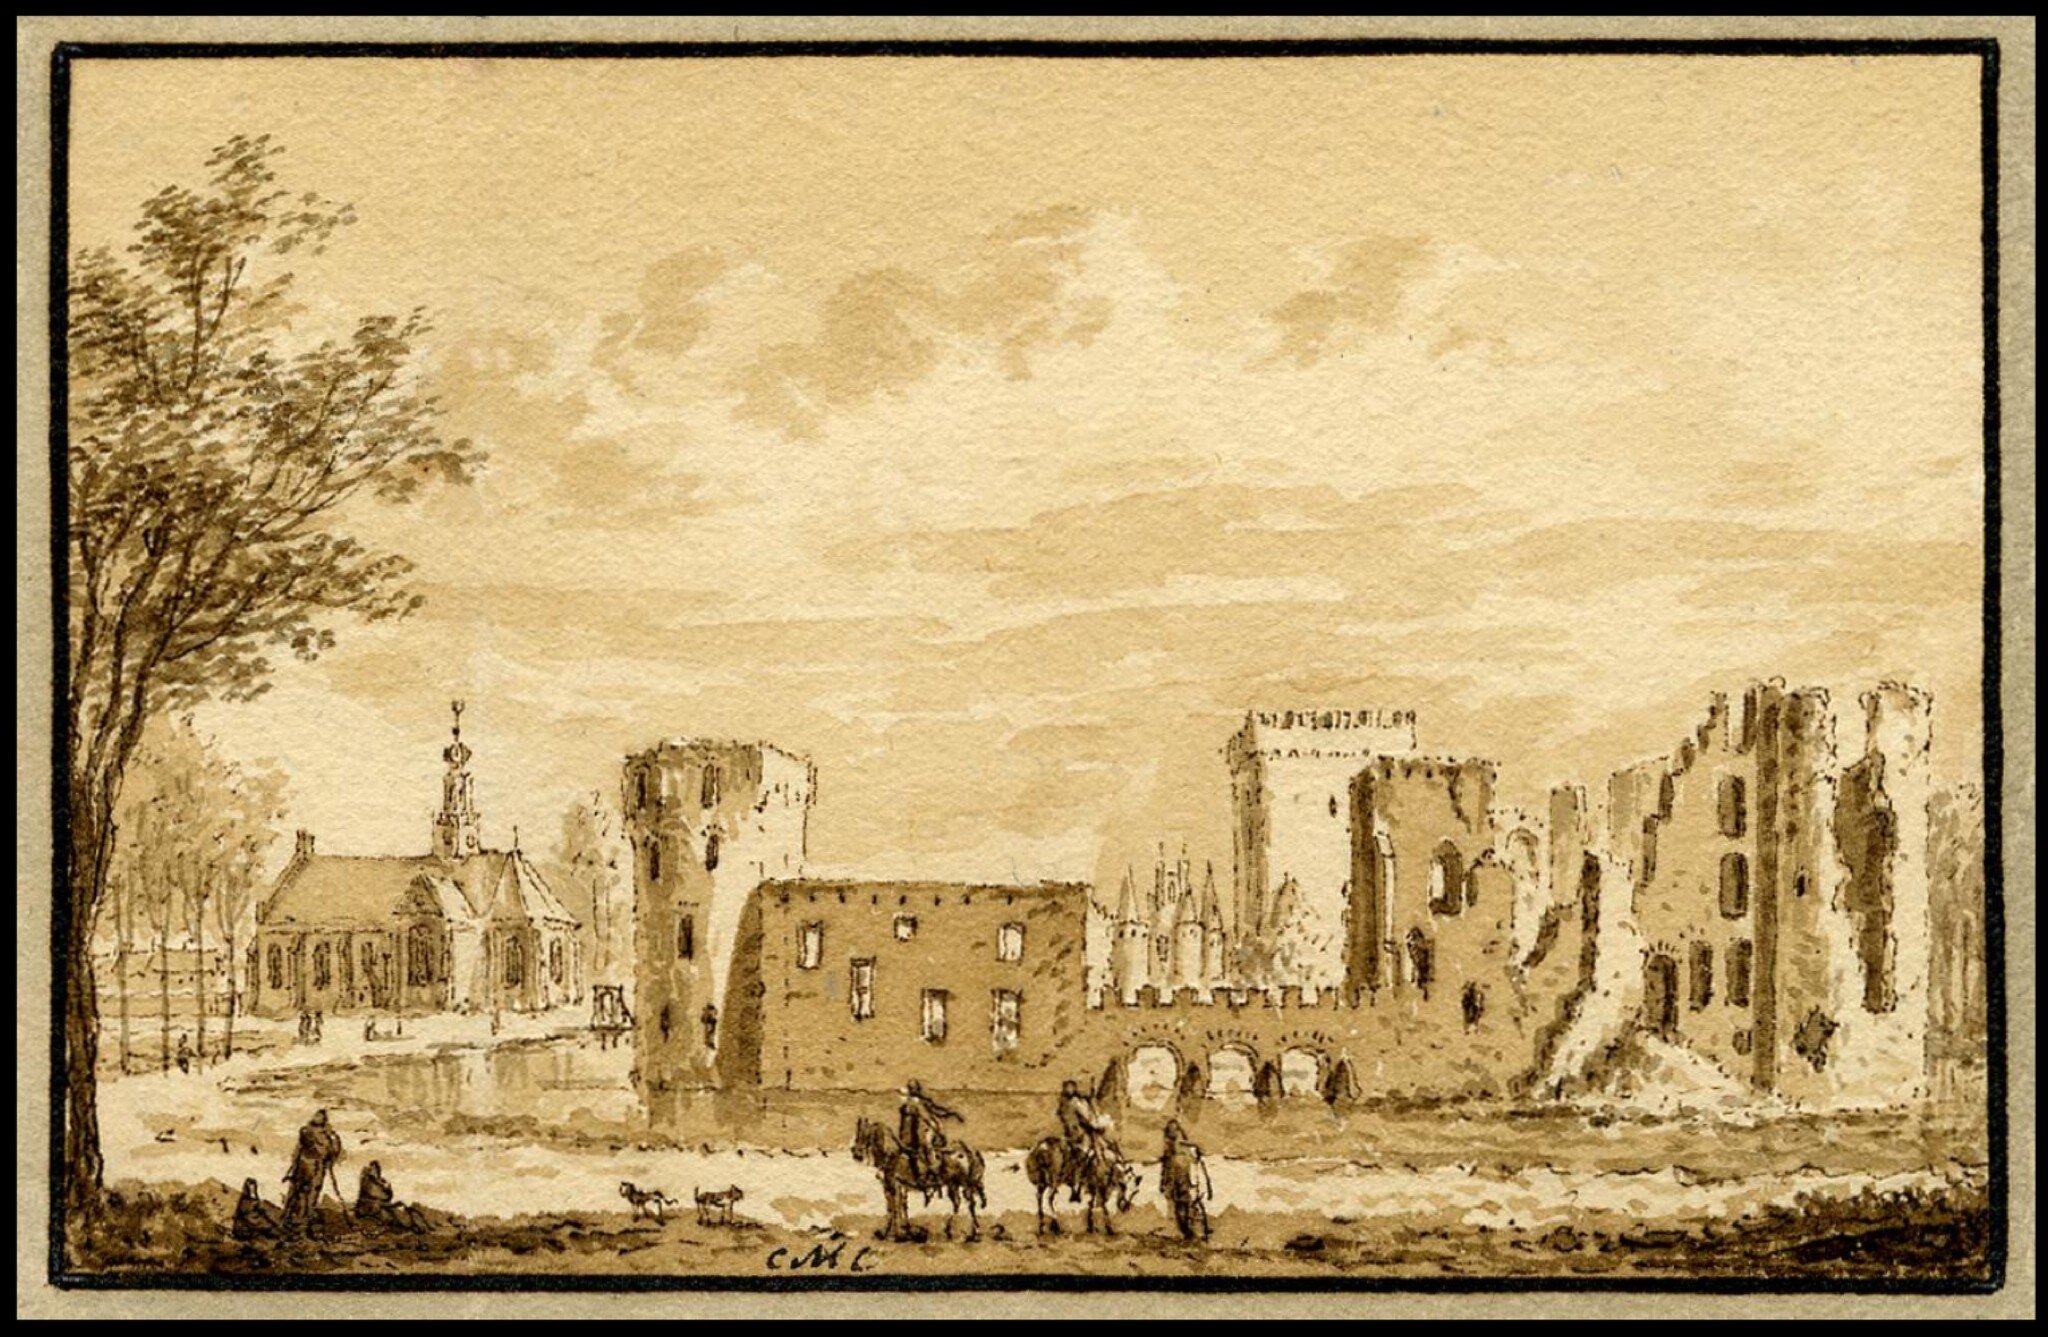 Drawing of the Slot at Egmond aan den Hoef ruin not long after its destruction